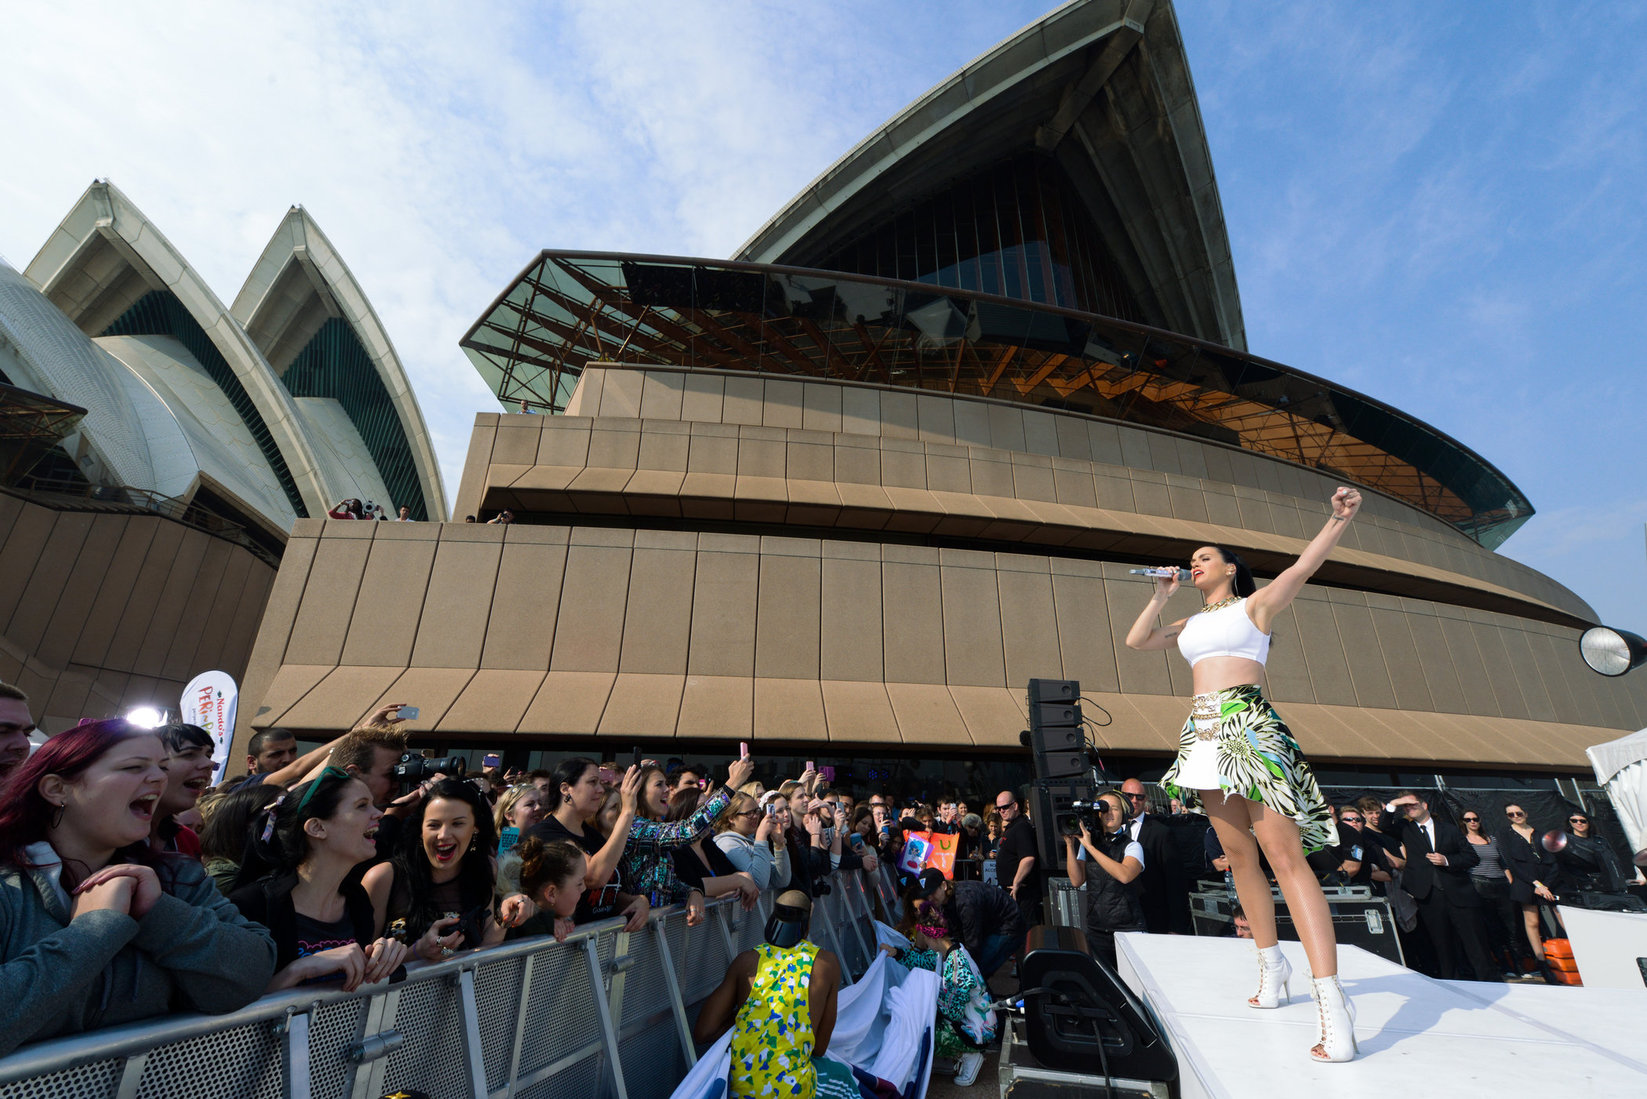 Katy Perry Pictures. Katy Perry – “Sunrise” performance in Sydney 10/29/13